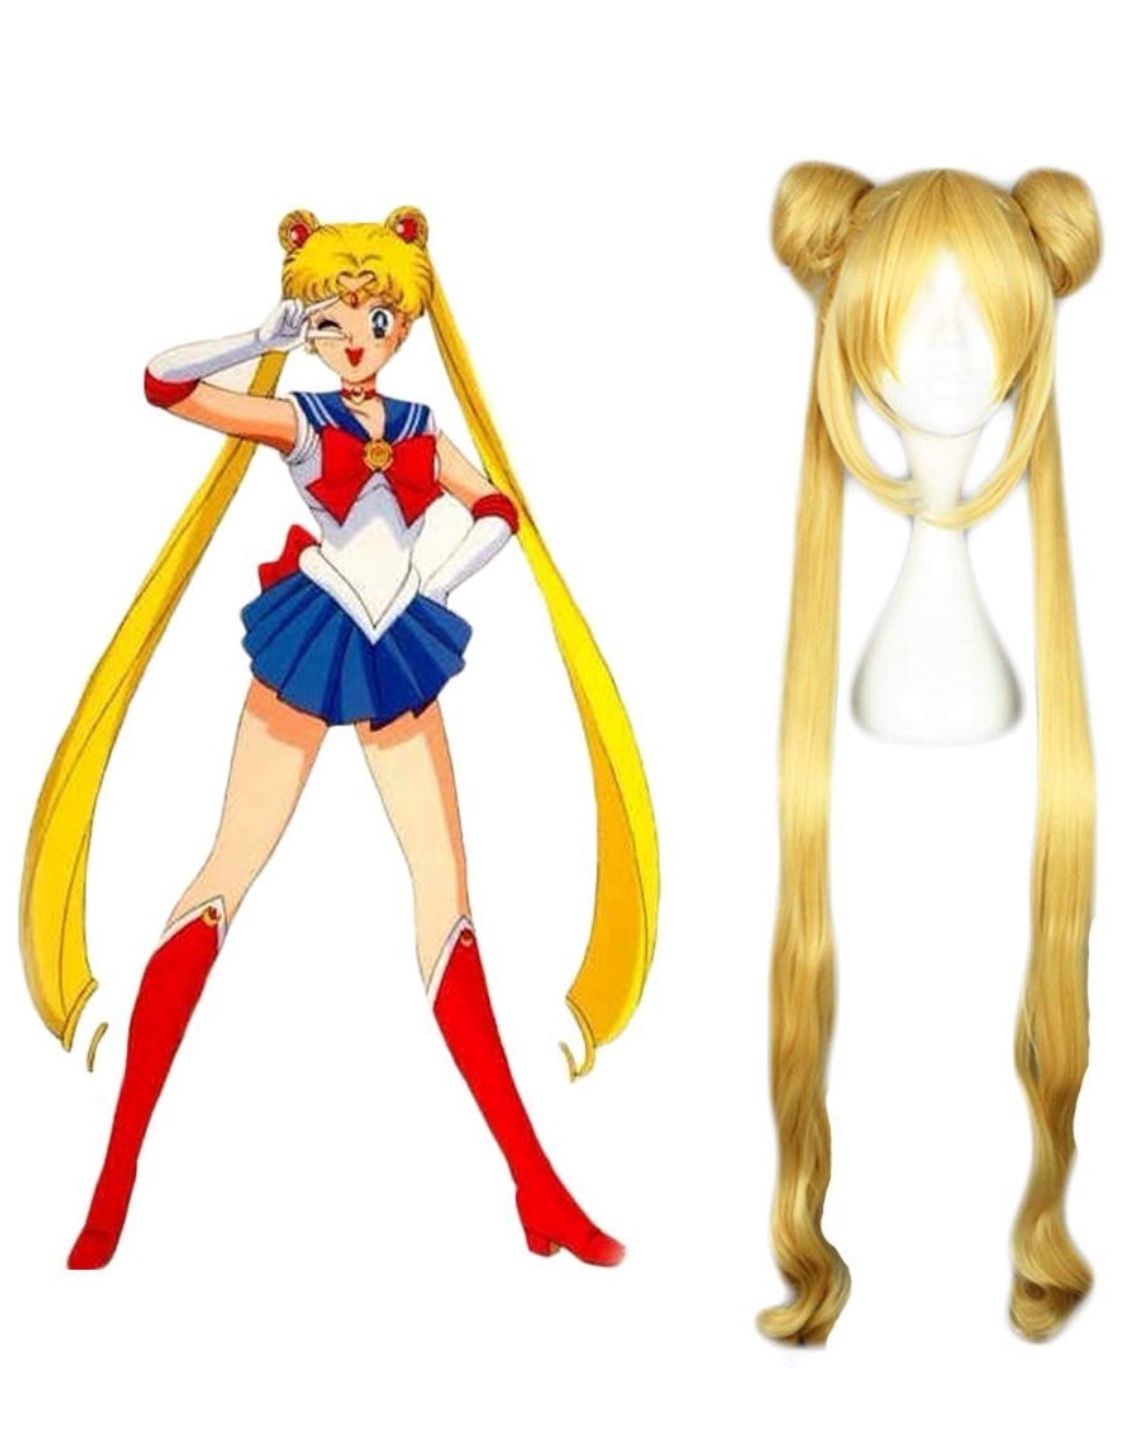 Long Curly Golden Ponytails Wig with Buns for Sailor Moon Cosplay Anime Blonde Pigtails Wig with Bangs  (ONLY WIG)